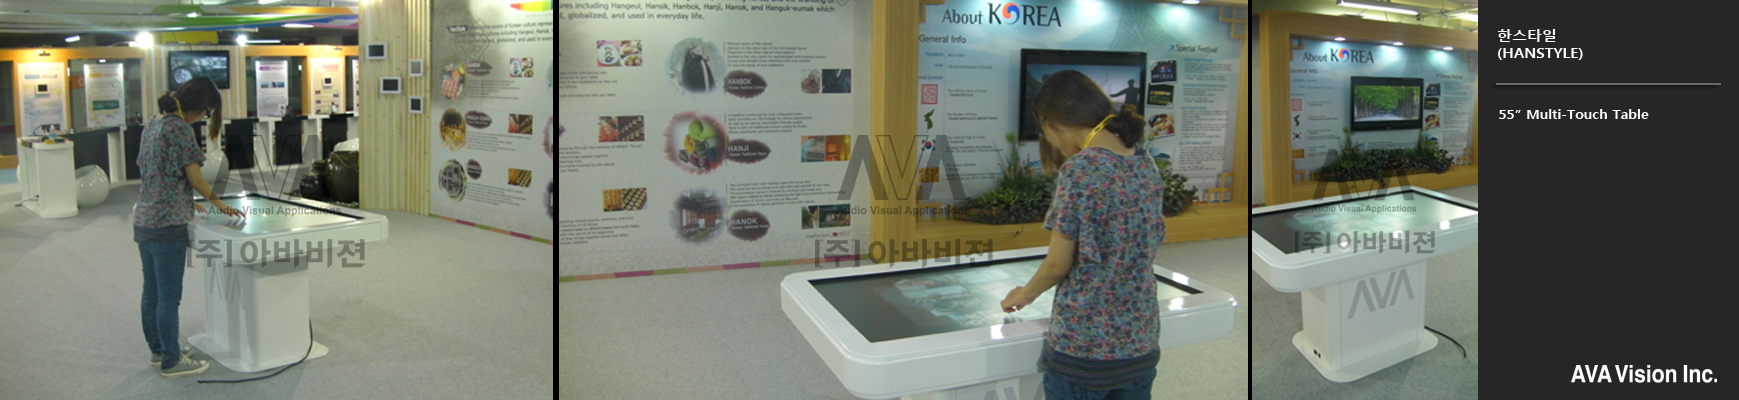 HAN STYLE : Multi-touch table